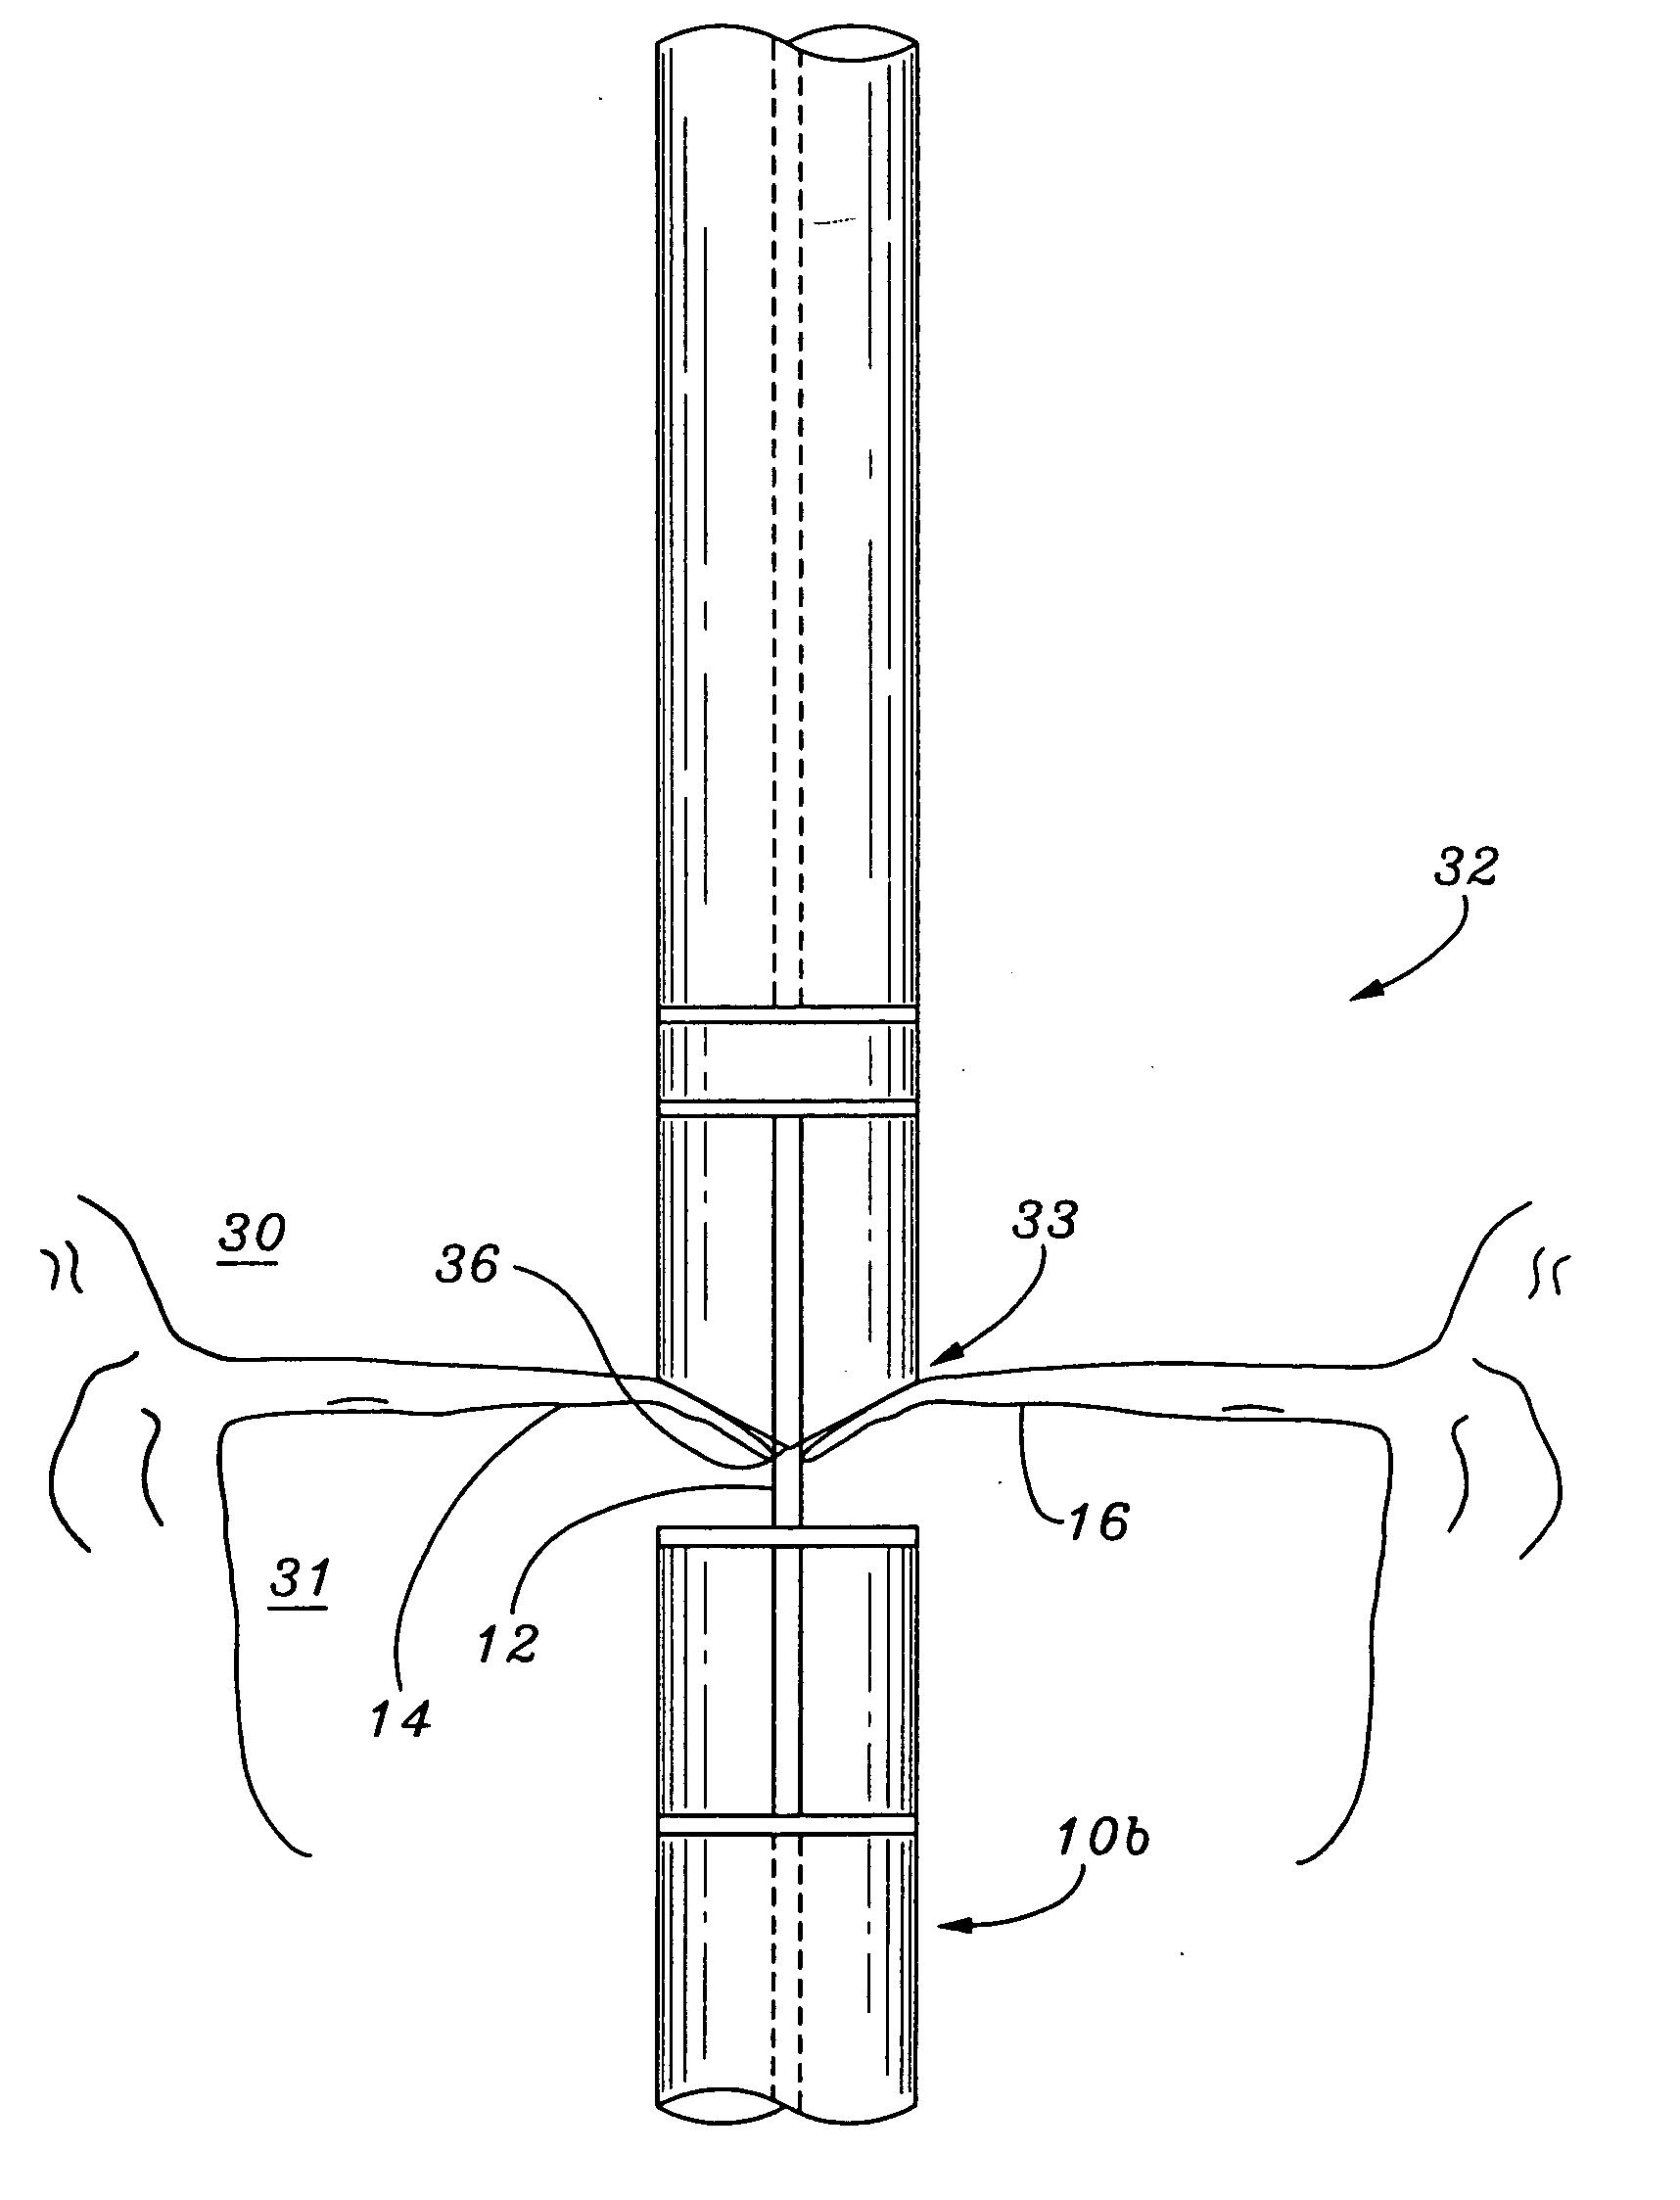 Method and system for tissue repair using dual catheters